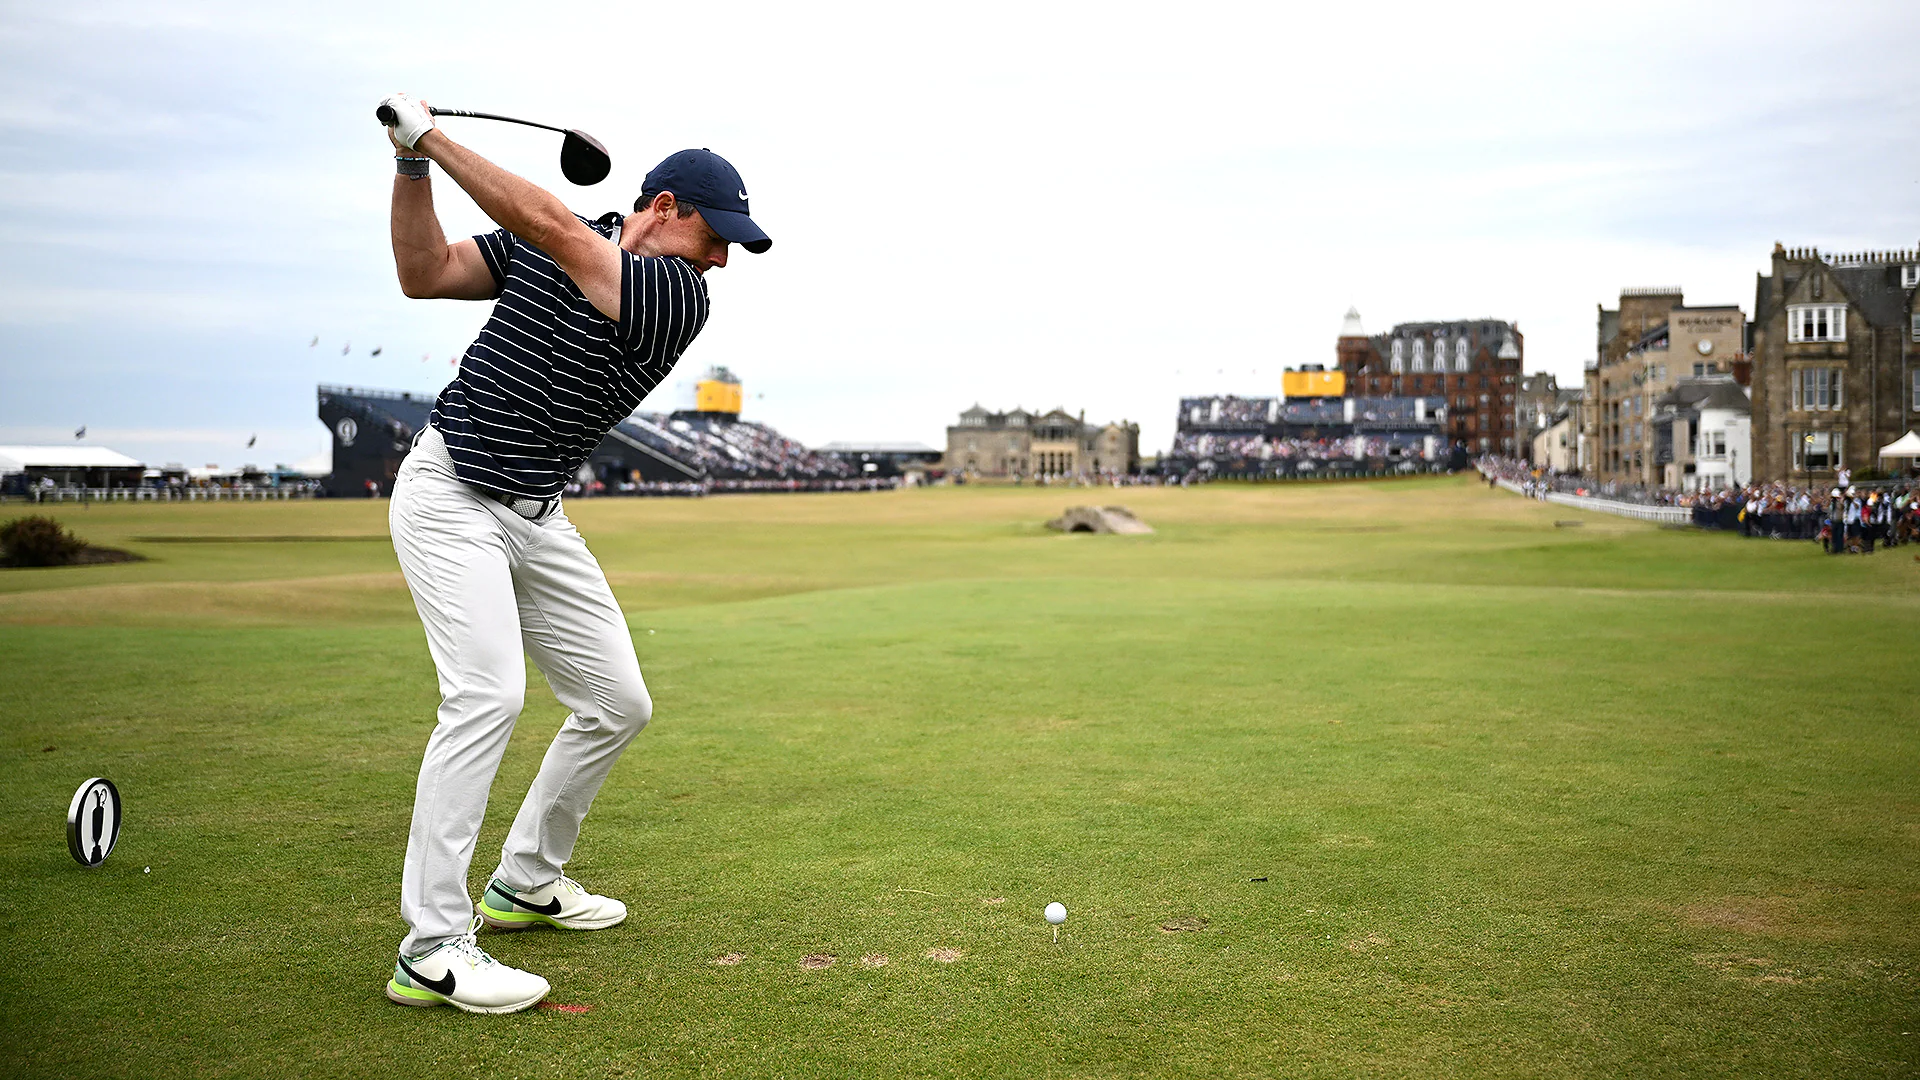 2022 British Open: Rory McIlroy says winning The Open at St. Andrews is ‘the holy grail of our sport’